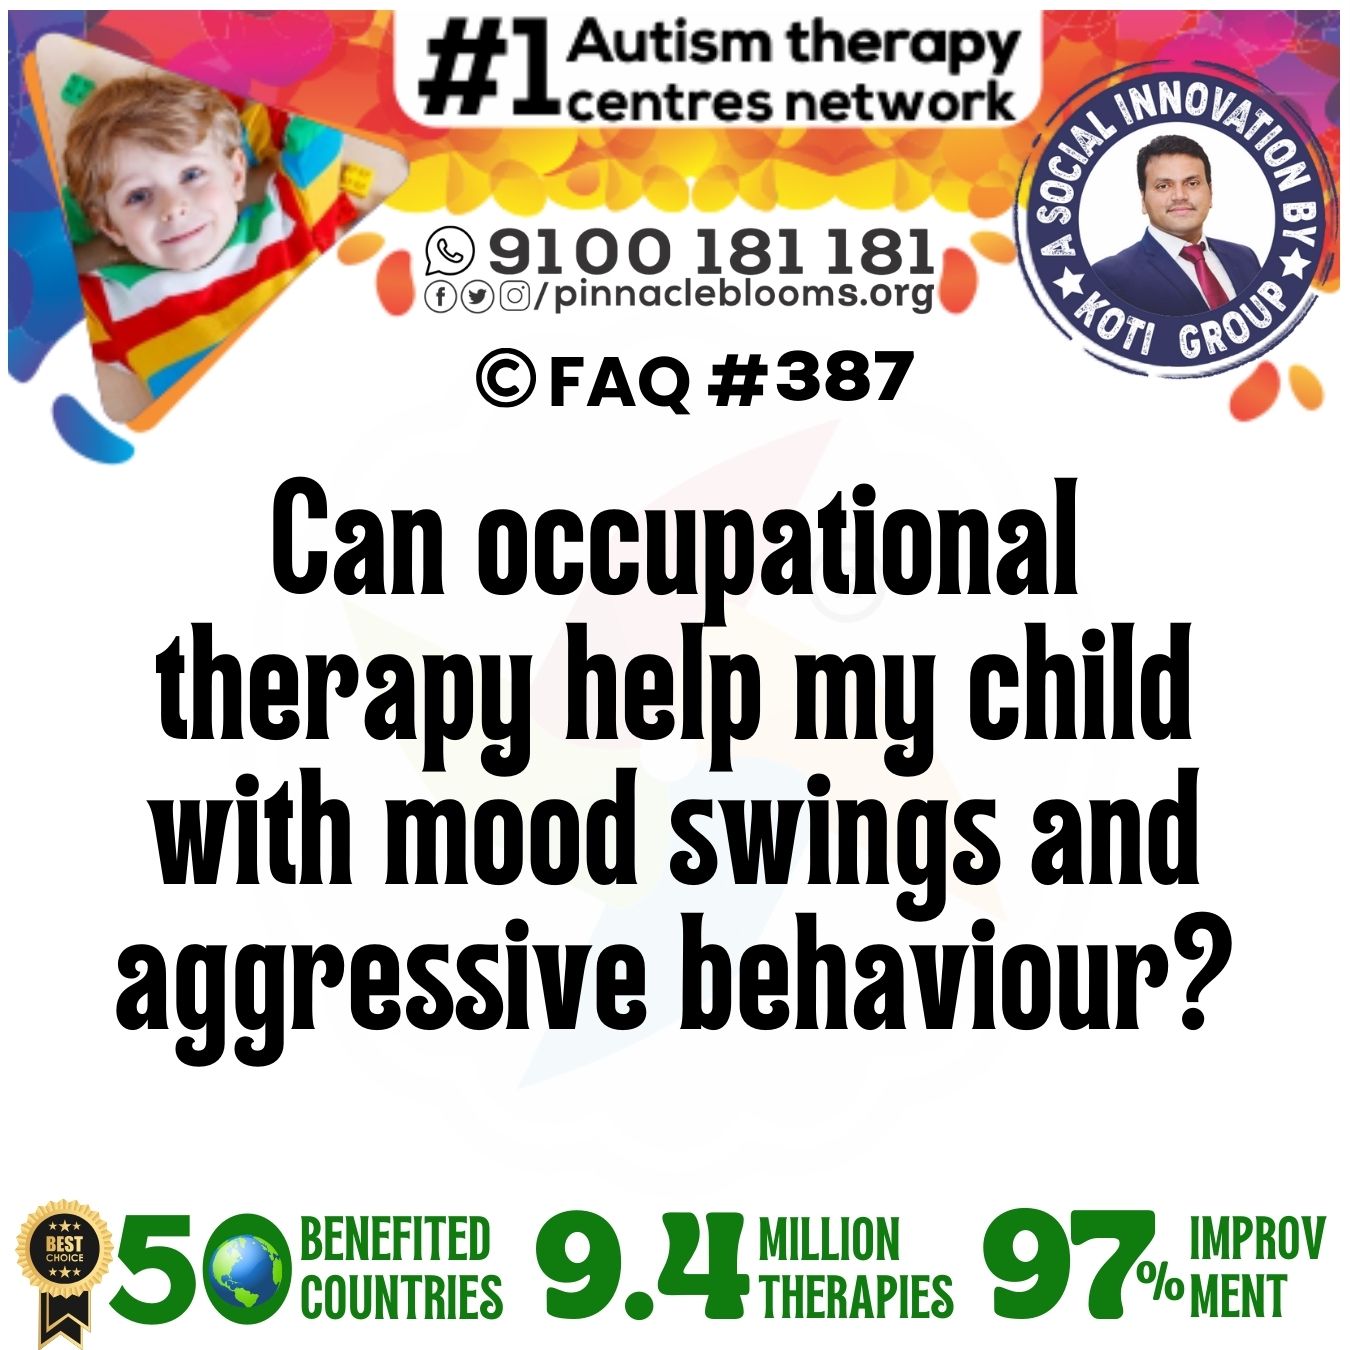 Can occupational therapy help my child with mood swings and aggressive behaviour?